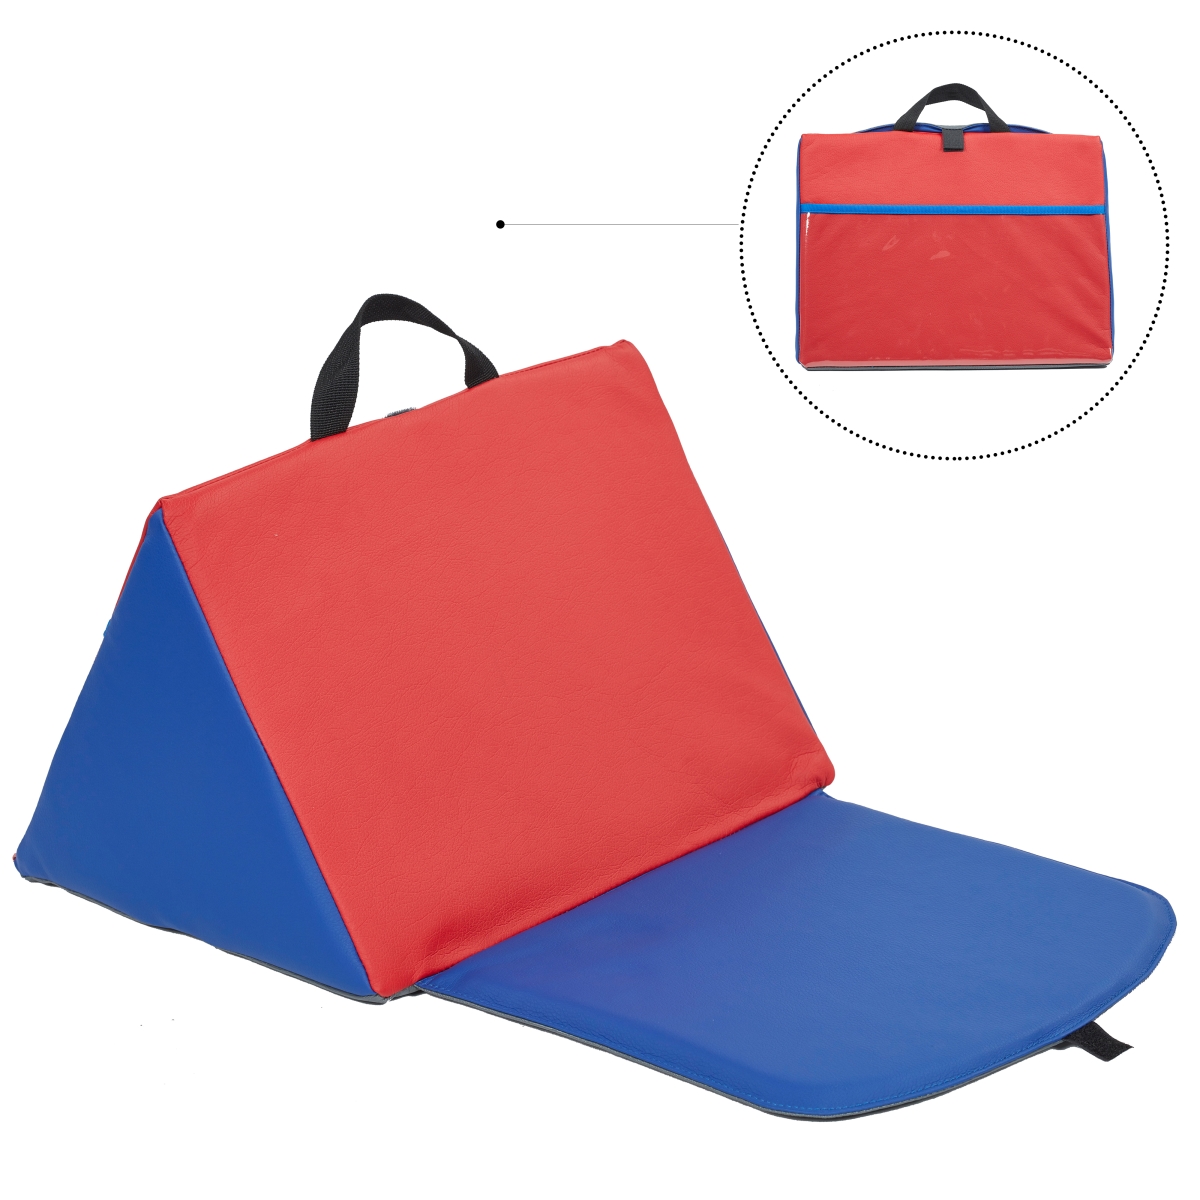 S Elr-12775-blrd Softzone Carry Me Seat With Storage, Blue & Red - Pack Of 6